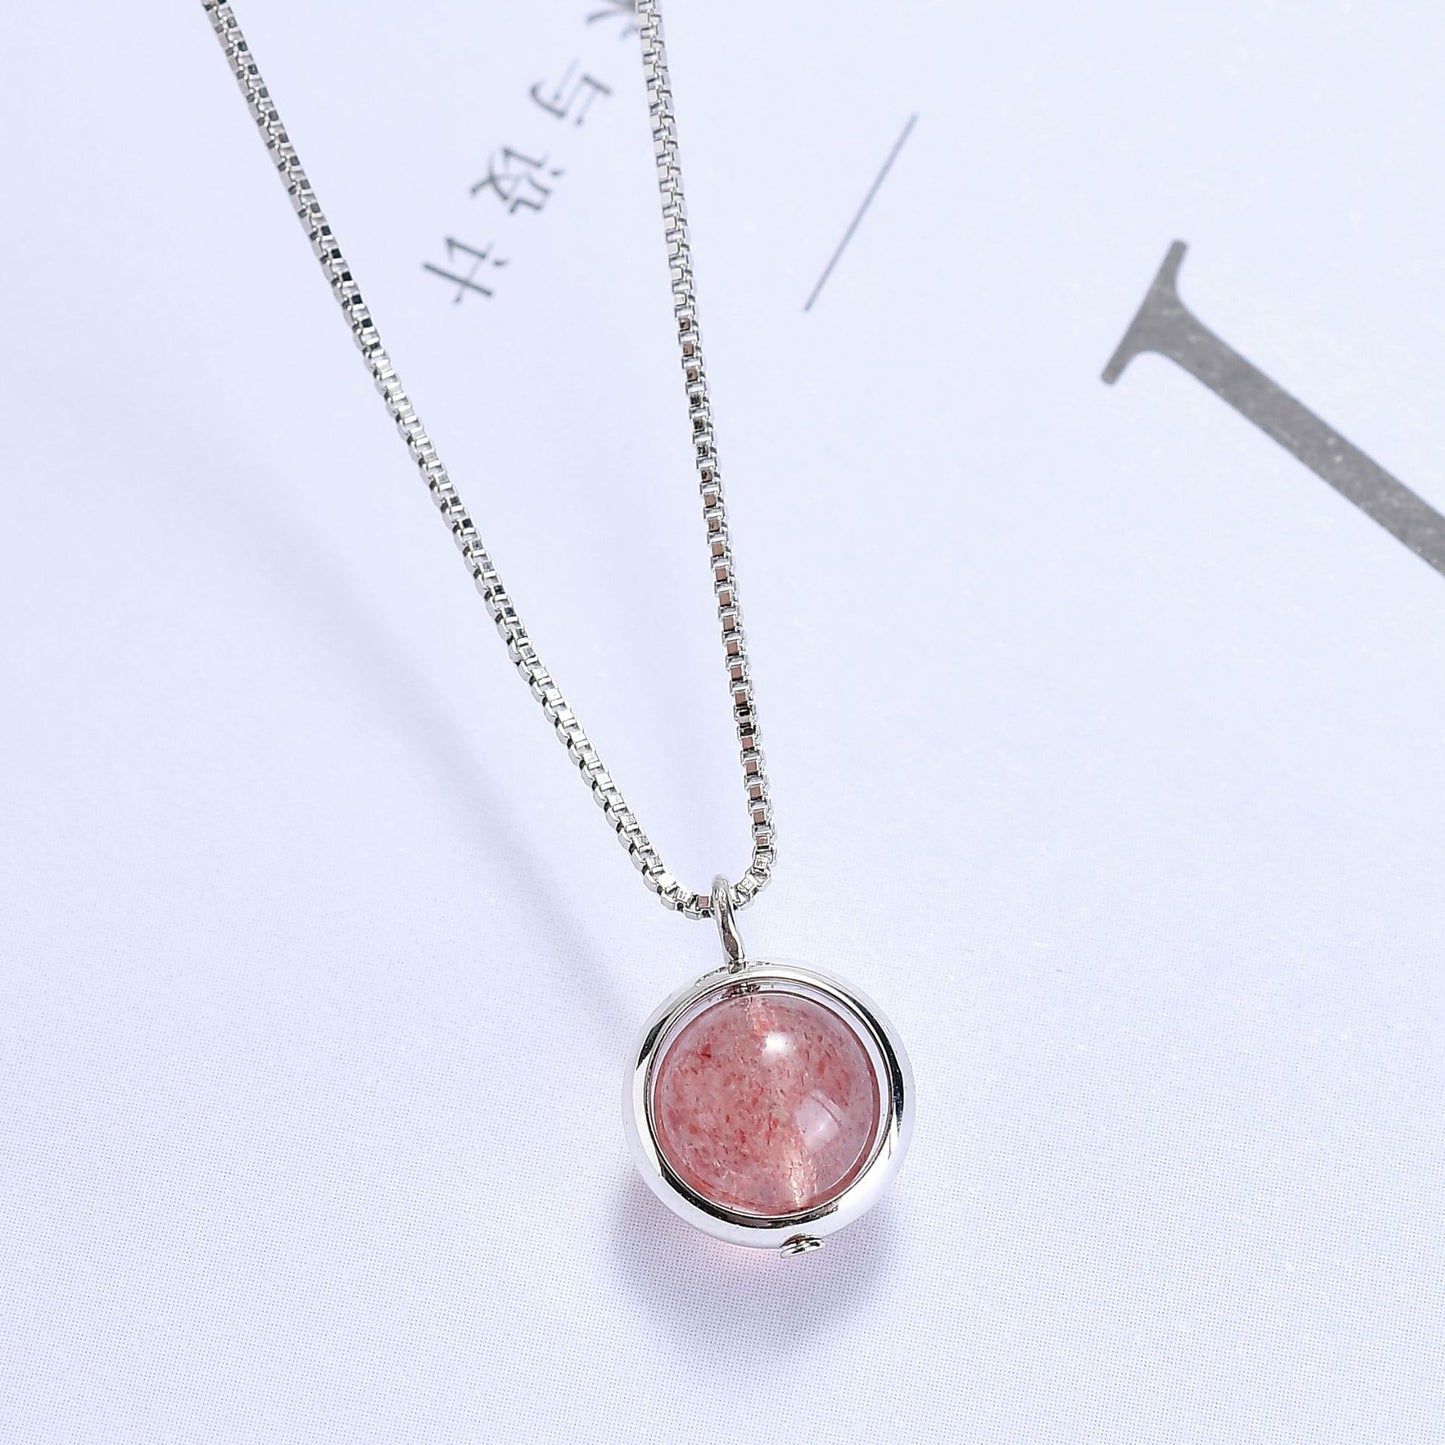 Korean Edition Sterling Silver Crystal Necklace with Peach Blossom Design